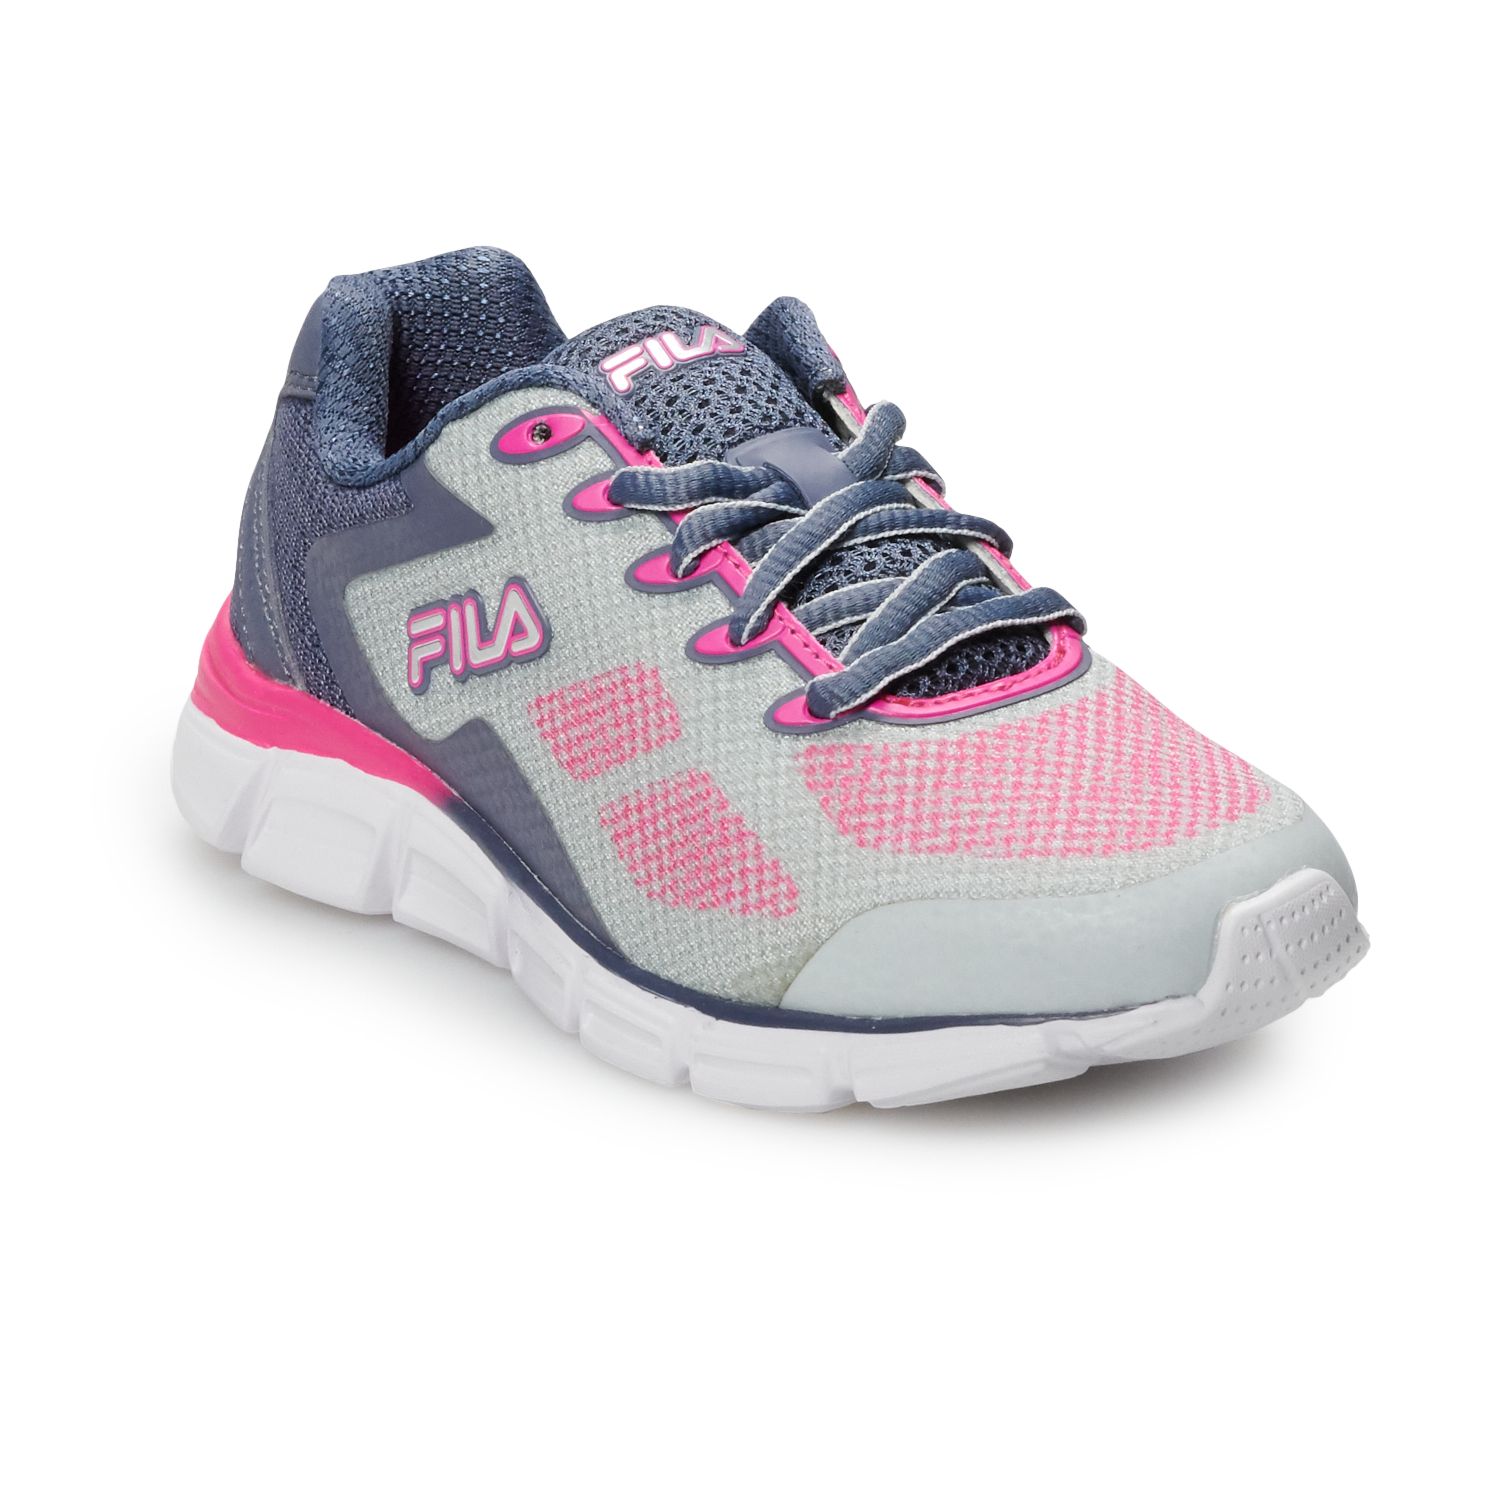 girls tennis shoes on sale